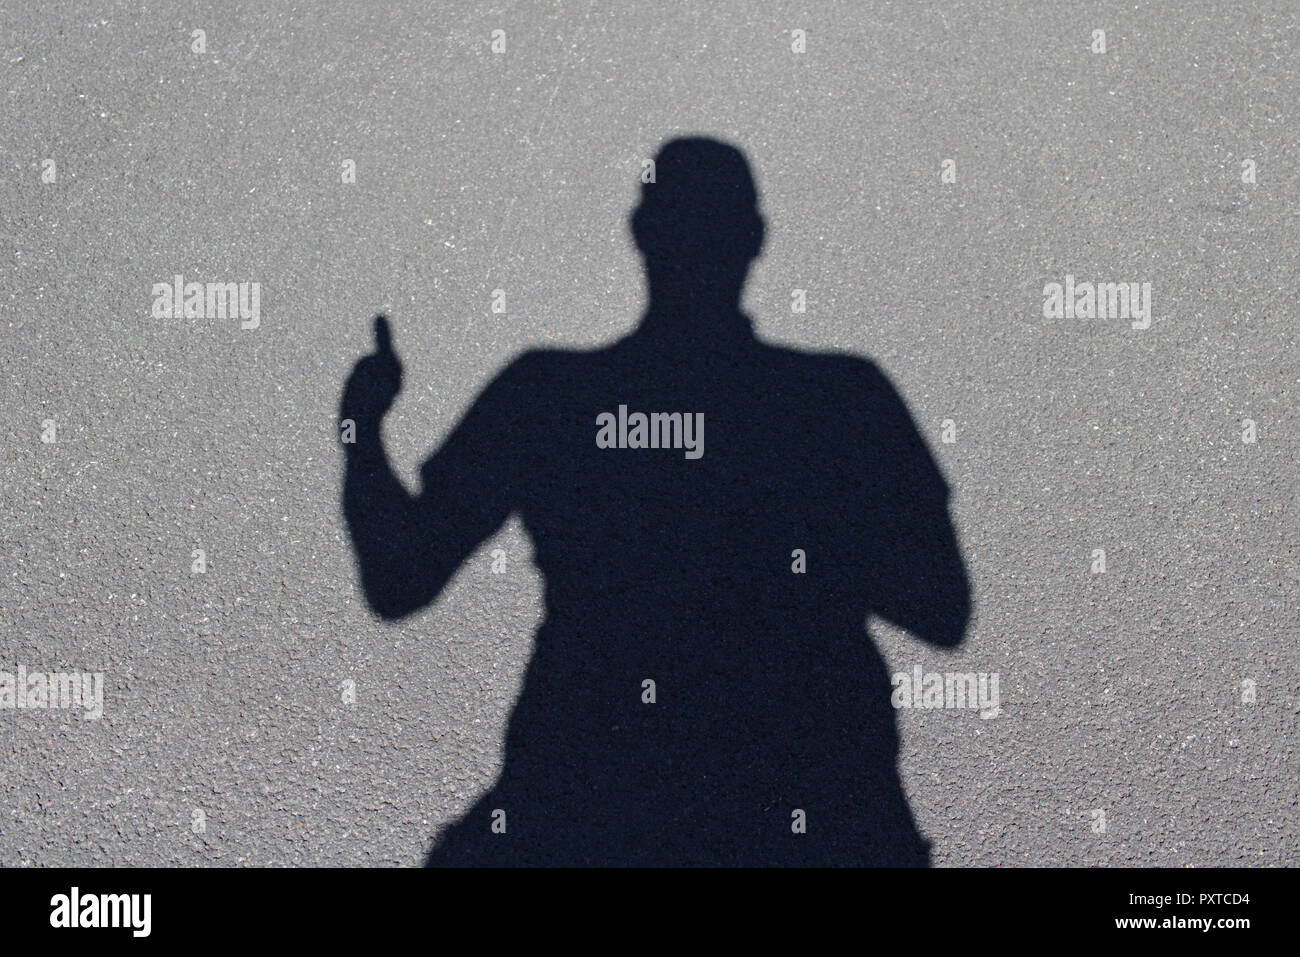 Human shadow on gray concrete ground giving the thumbs-up sign with one hand Stock Photo